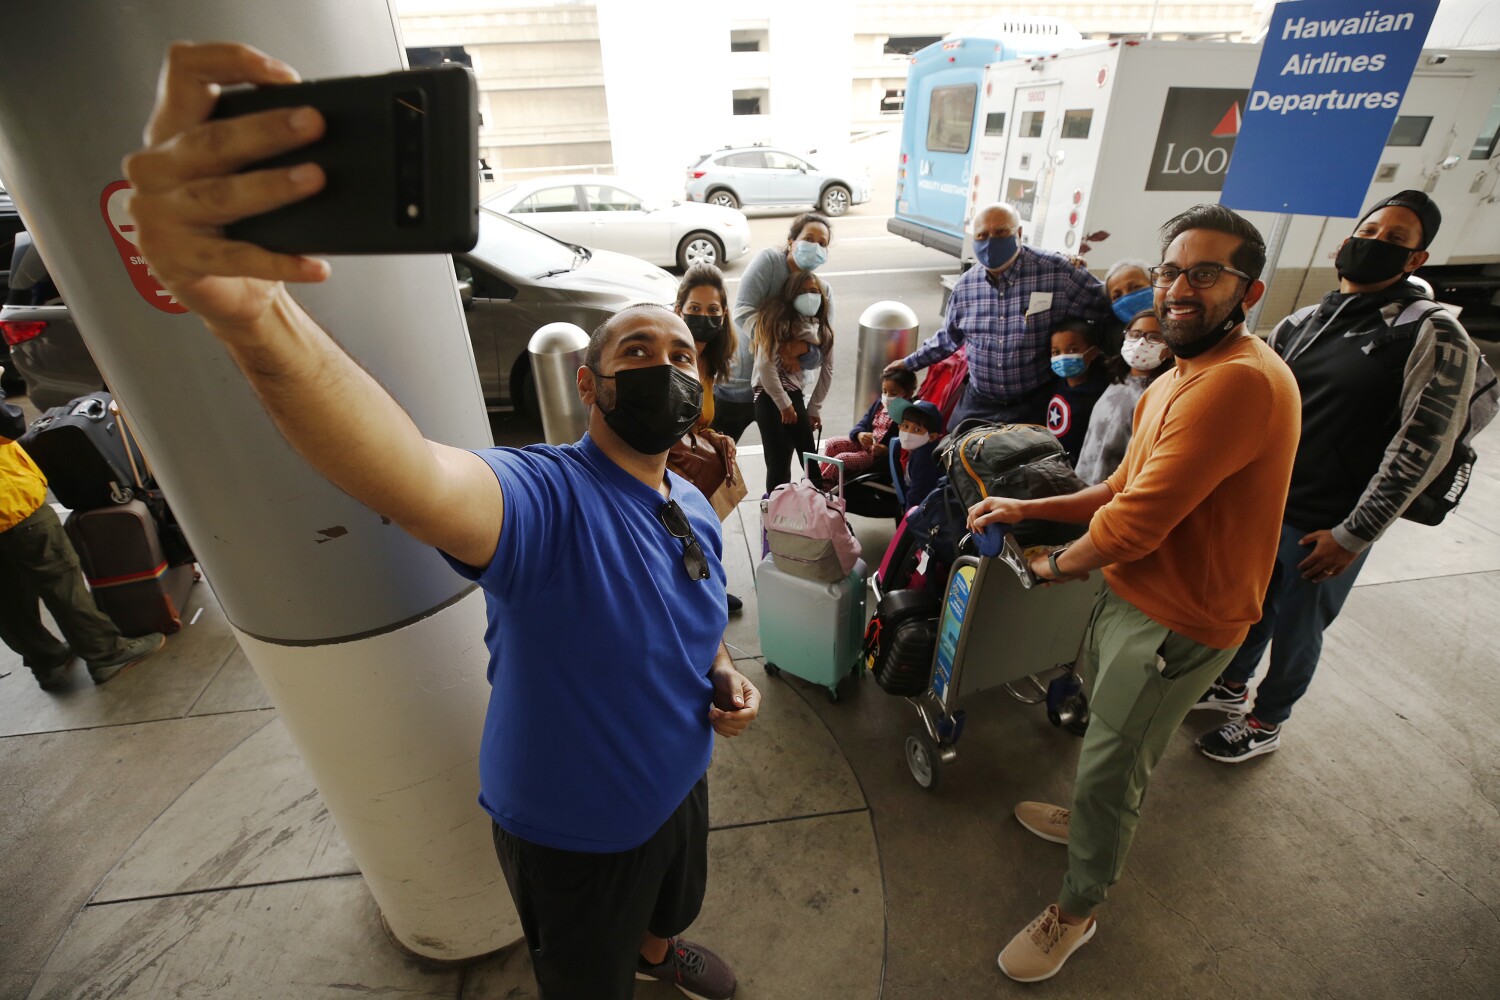 LAX Thanksgiving travel expected to double, bringing new coronavirus dangers